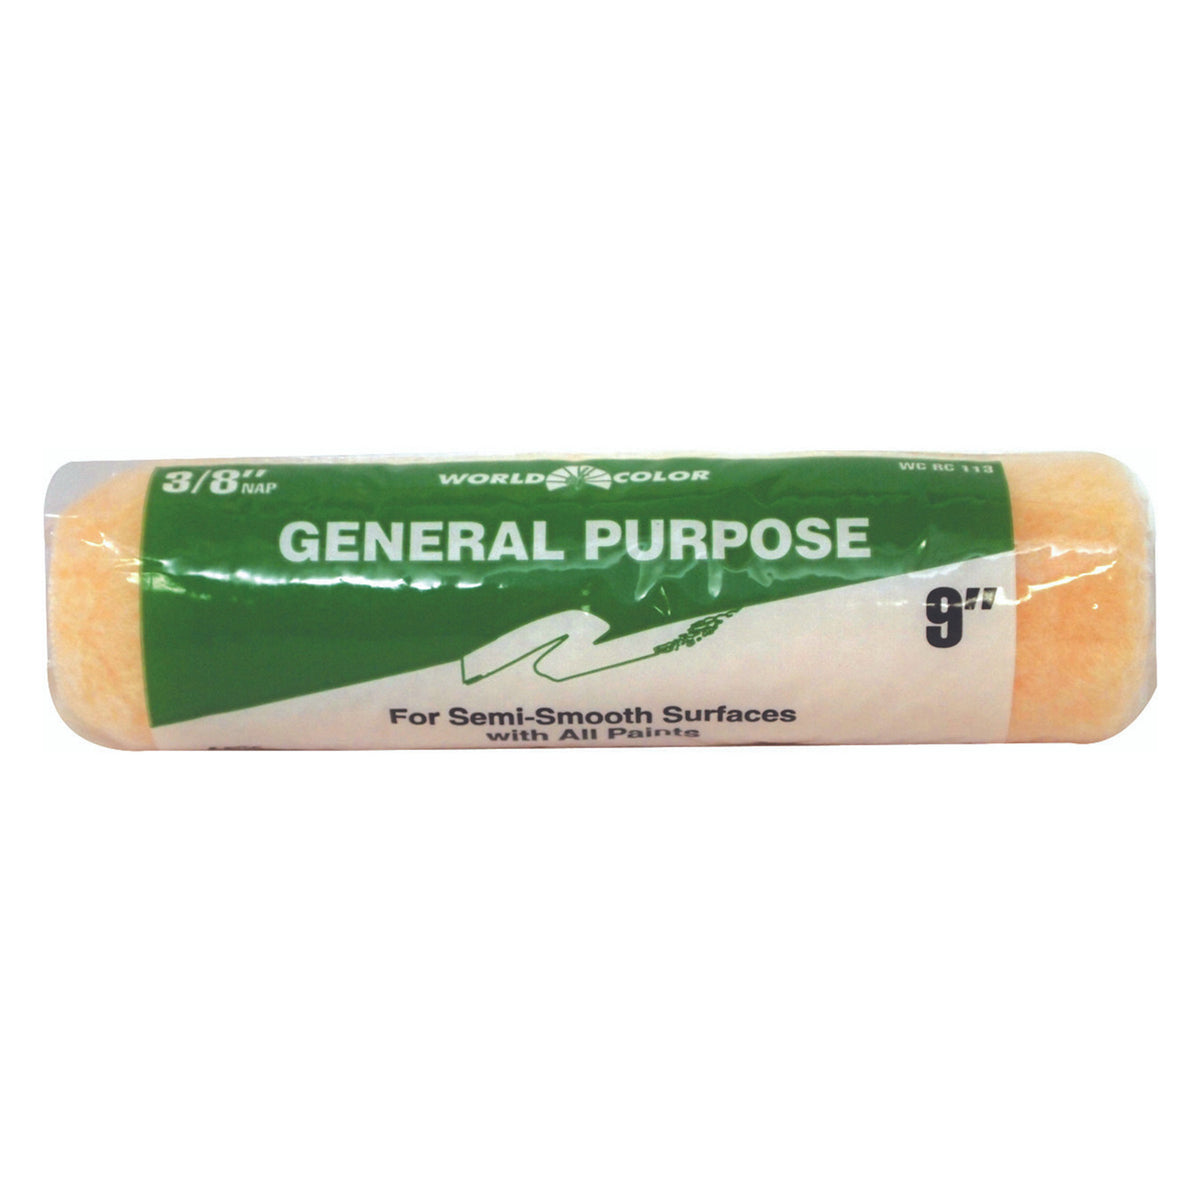 General Paint Roller Cover